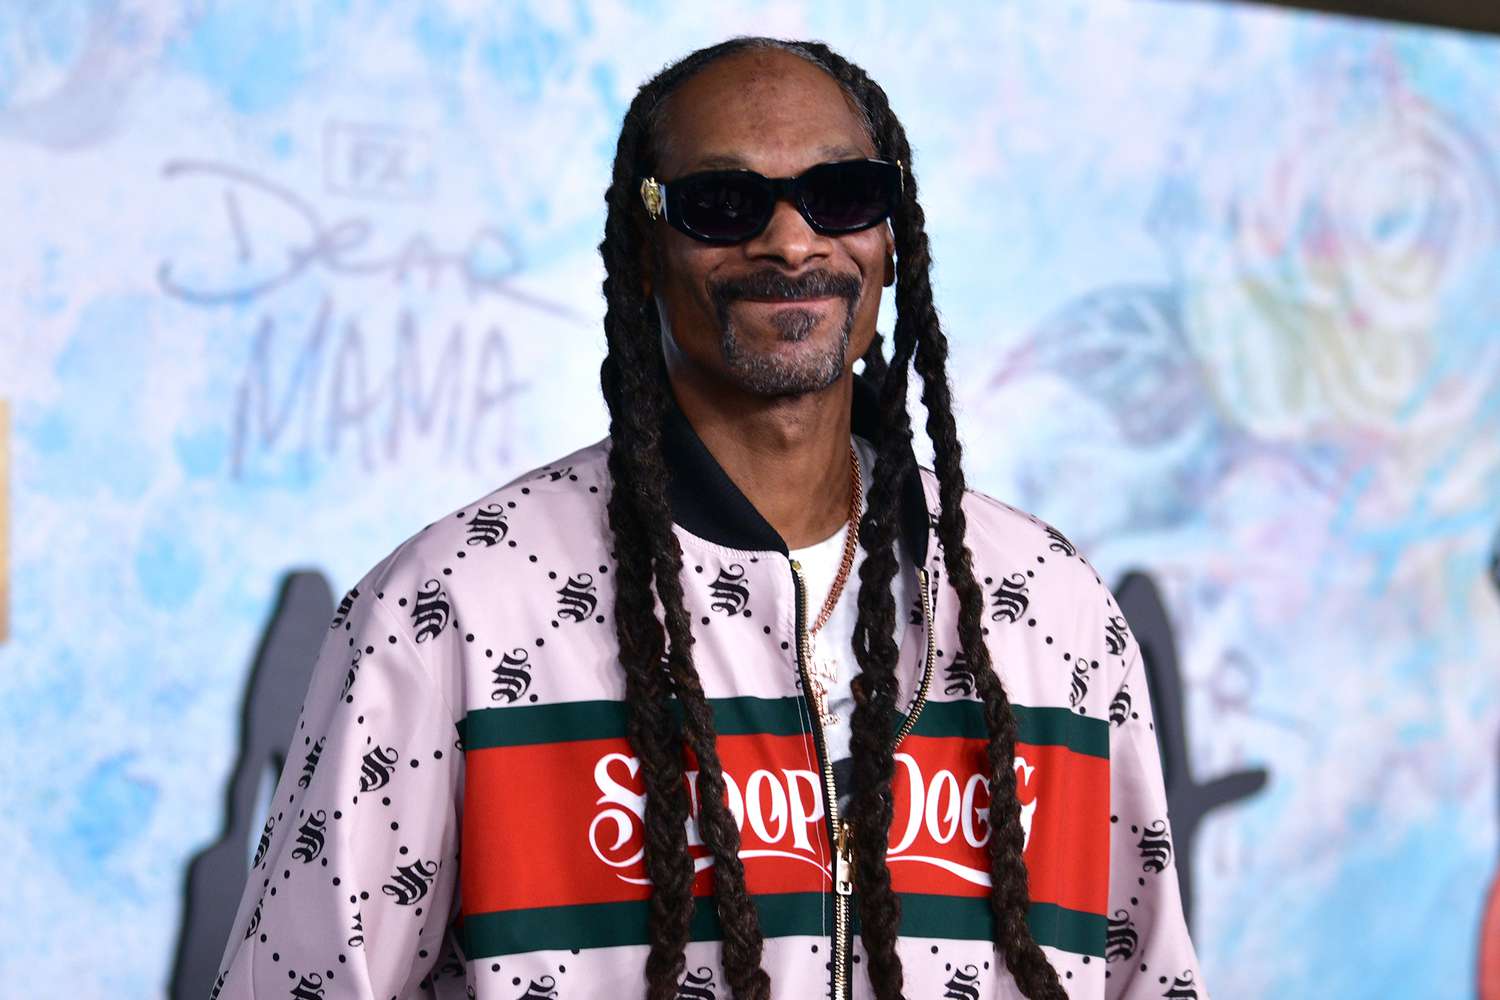 how old is Snoop Dogg